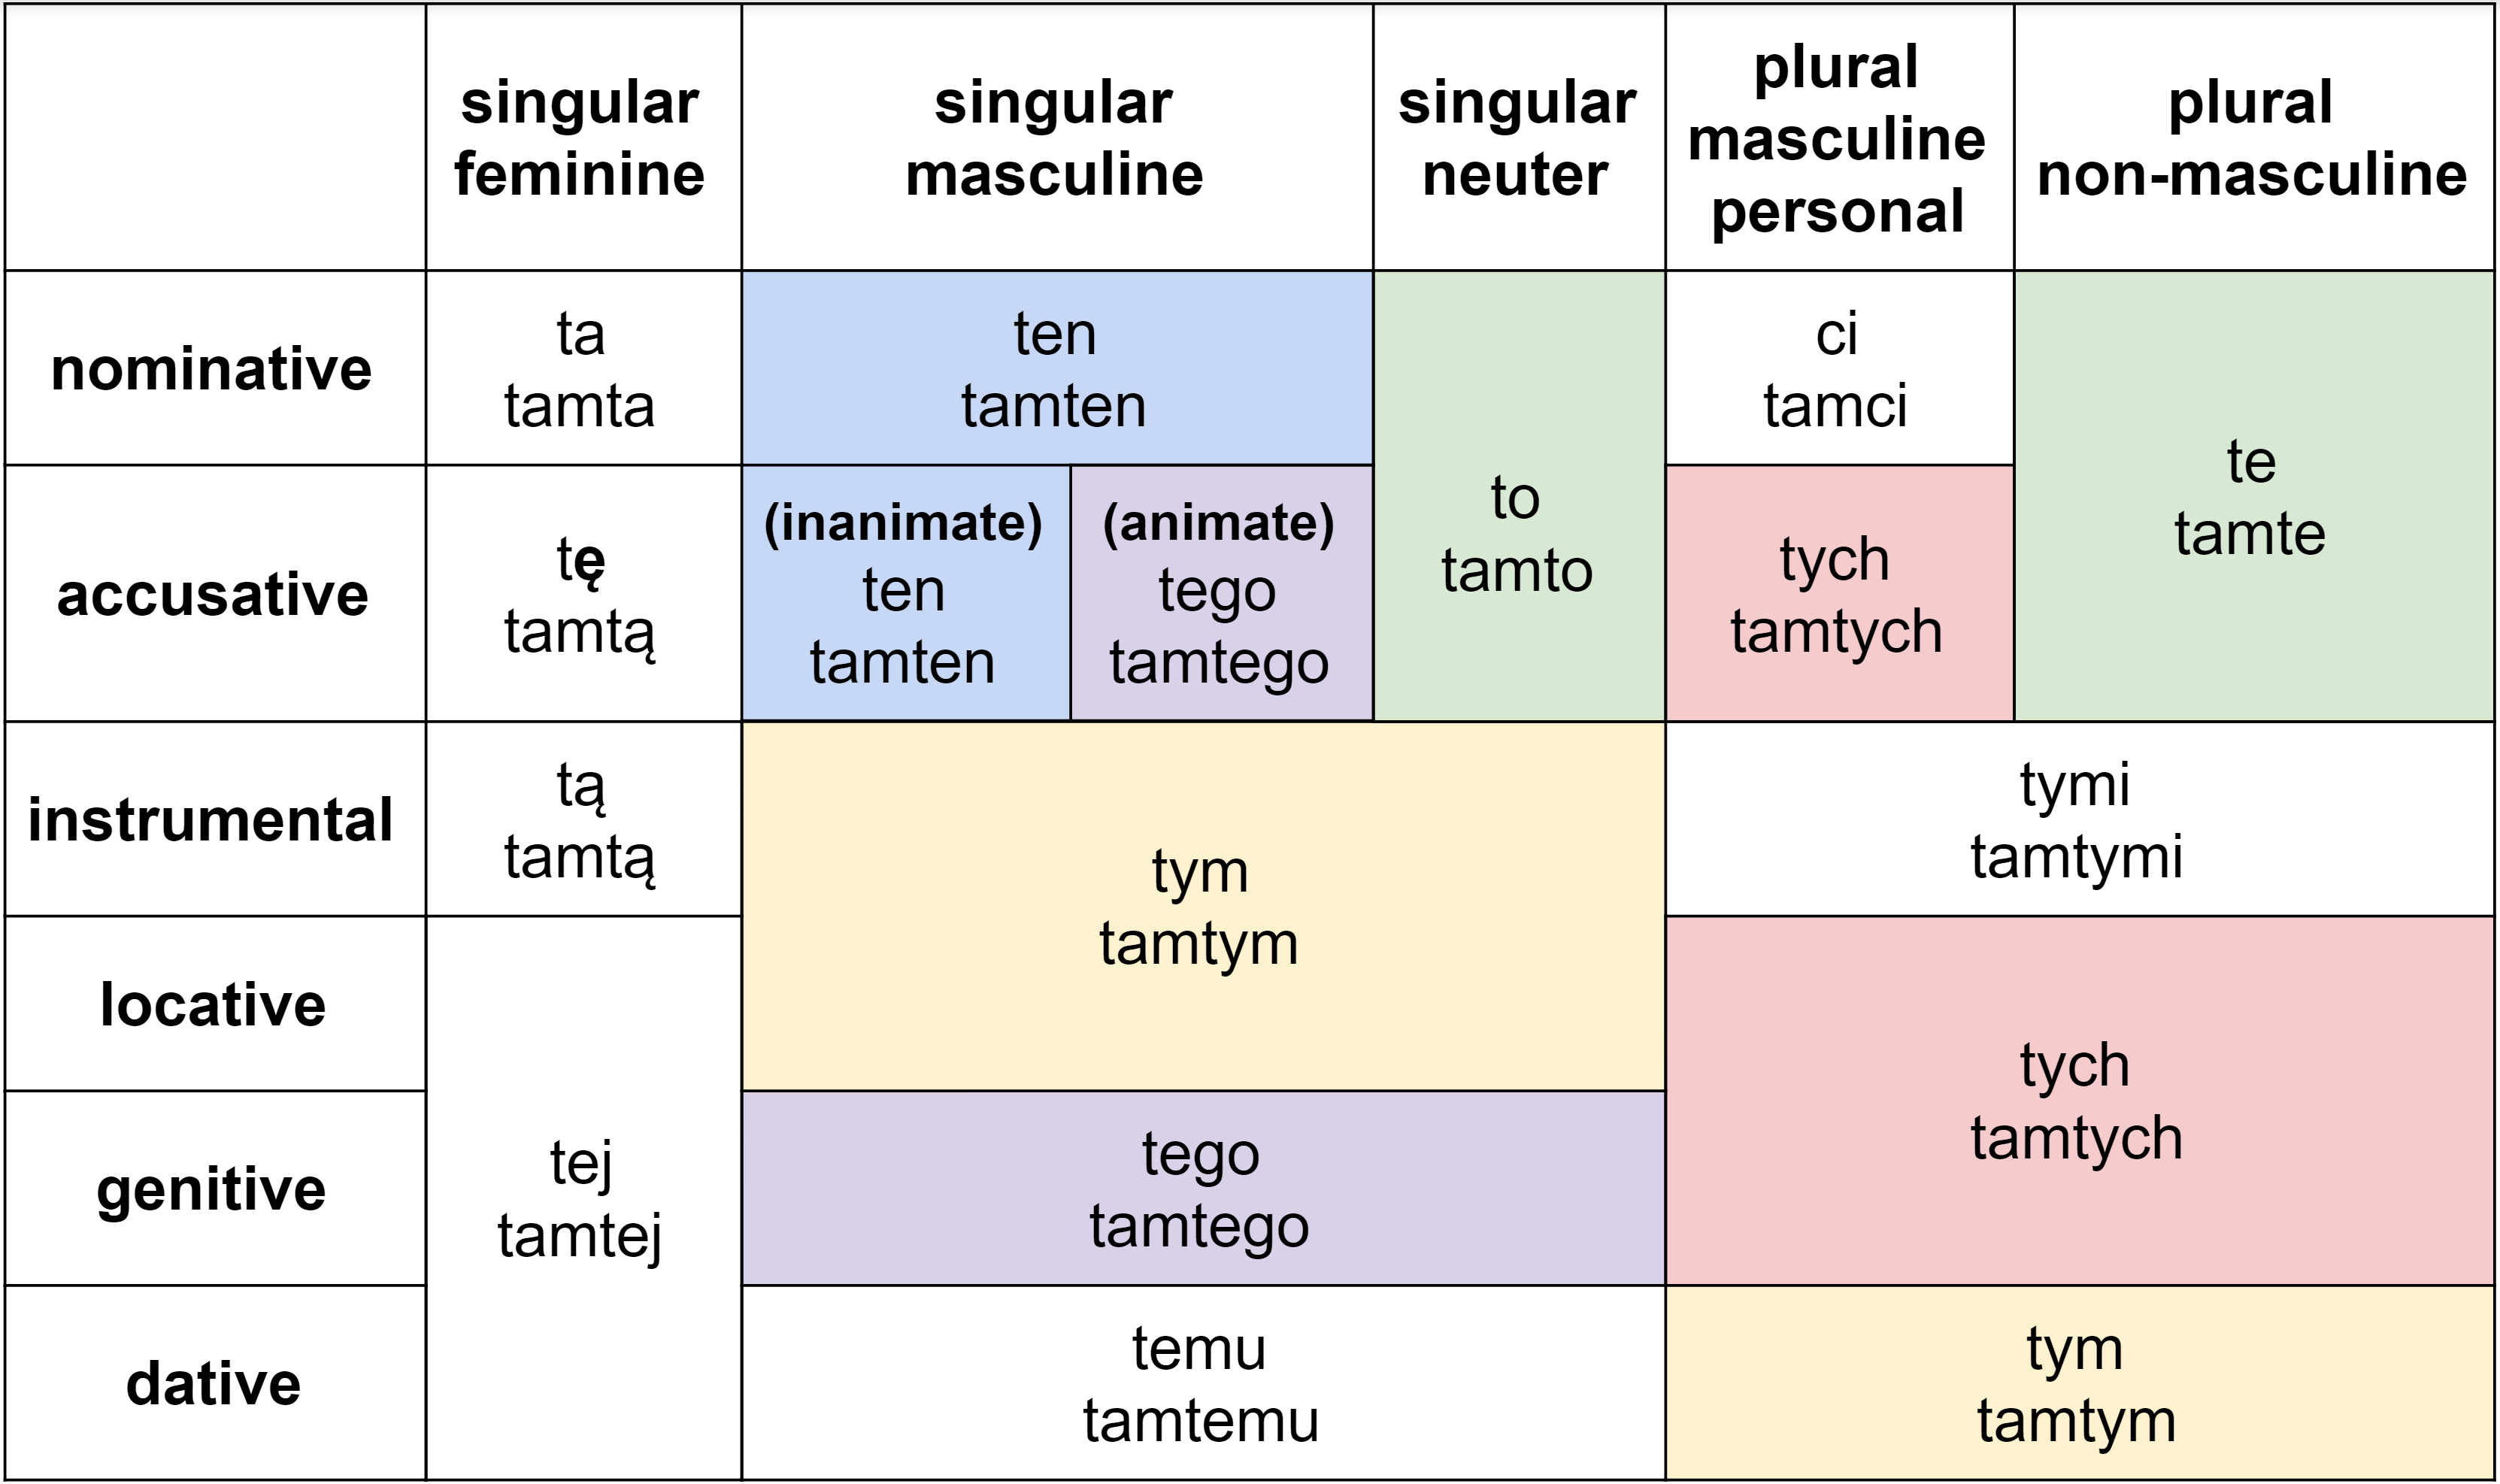 Pronoun chart with complete declension of the Polish demonstrative pronouns “ten” and “tamten”